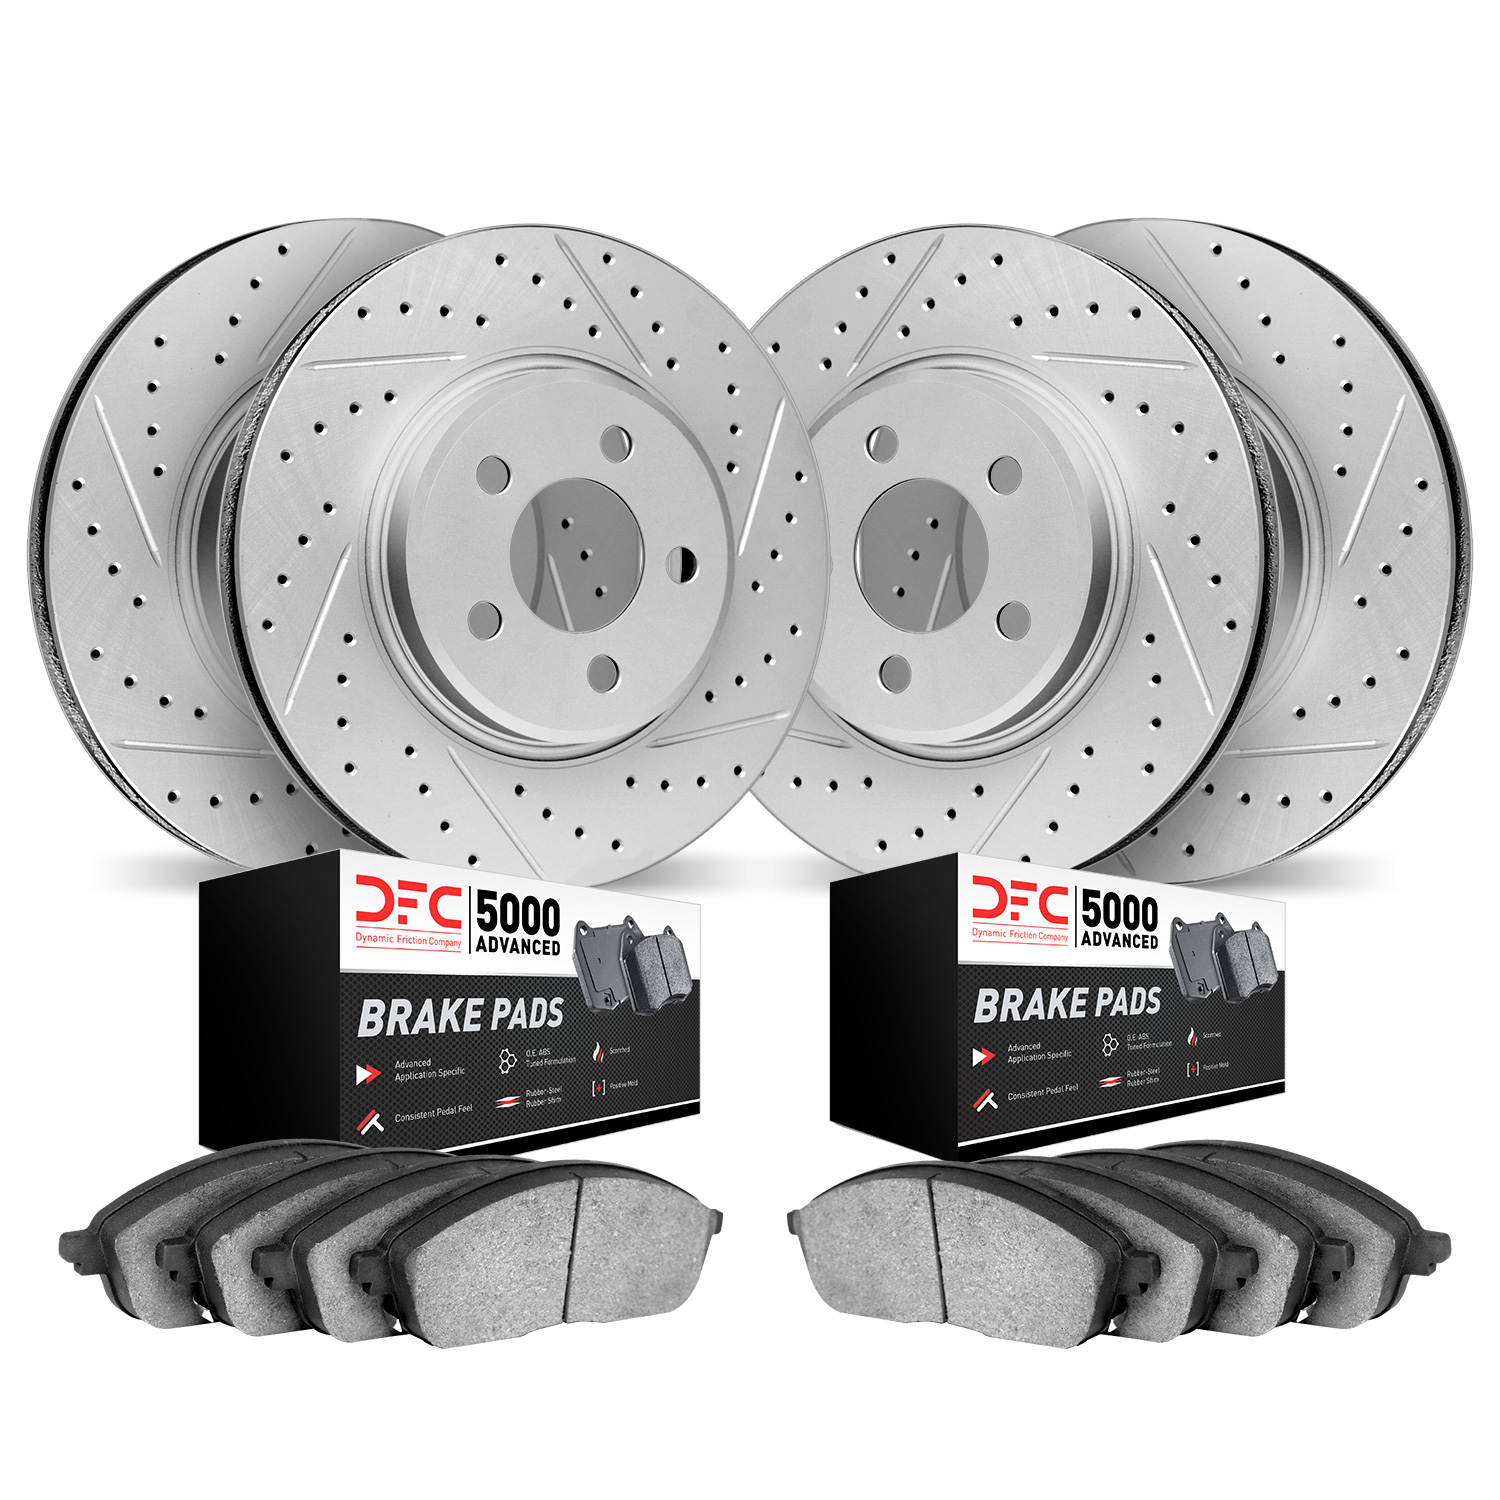 2504-56010 Geoperformance Drilled/Slotted Rotors w/5000 Advanced Brake Pads Kit, 2003-2011 Ford/Lincoln/Mercury/Mazda, Position: